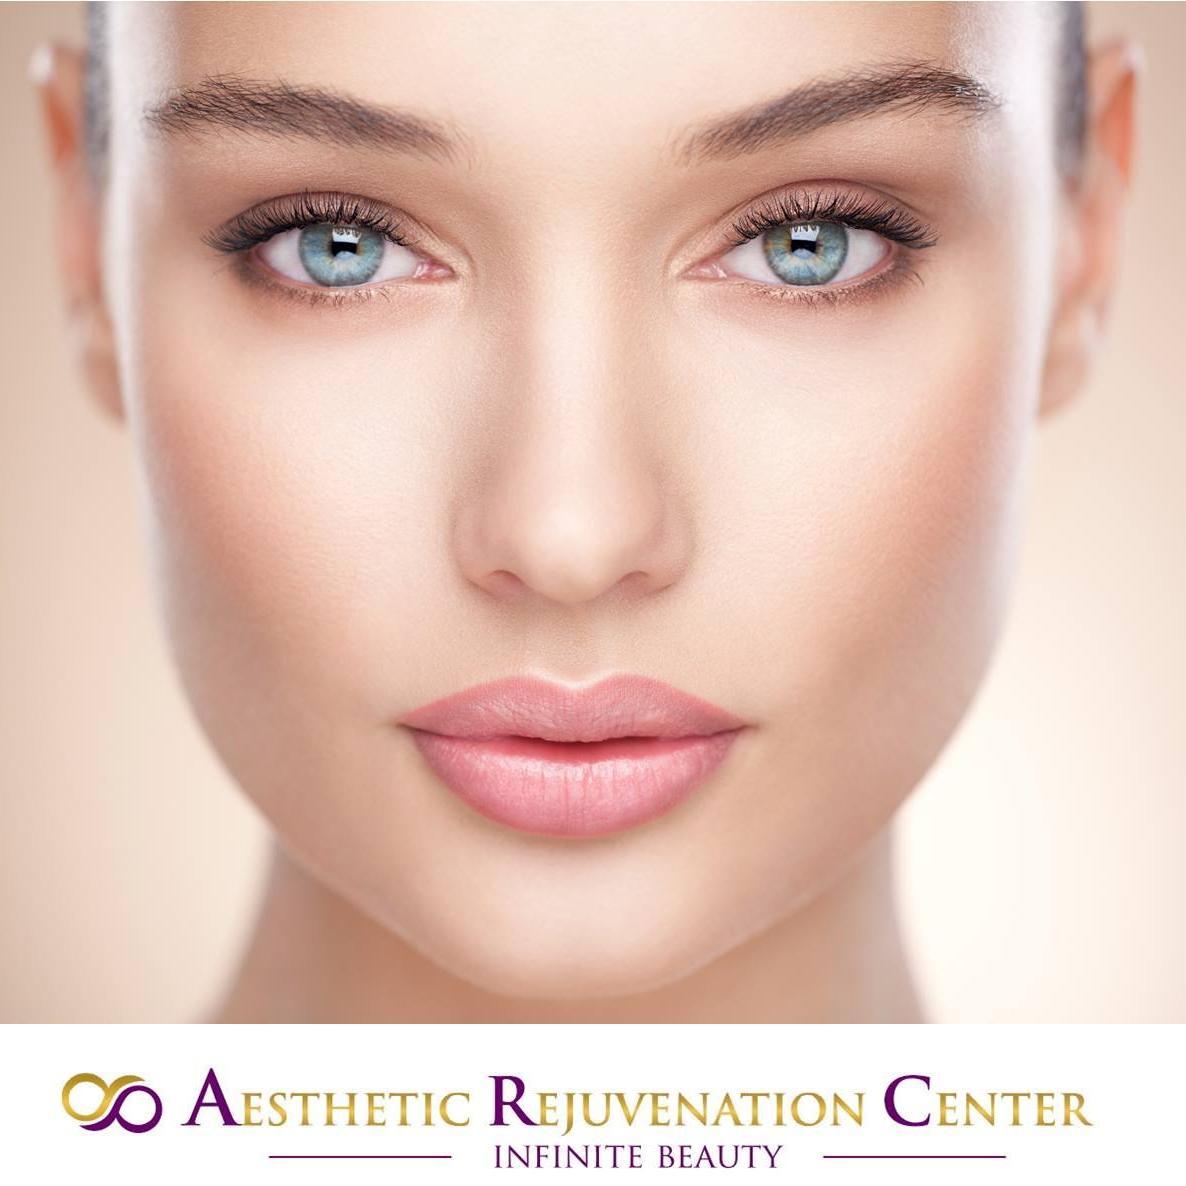 It is our desire to help our patients achieve and maintain healthy, youthful looking skin by providing a range of  non-surgical cosmetic enhancements.